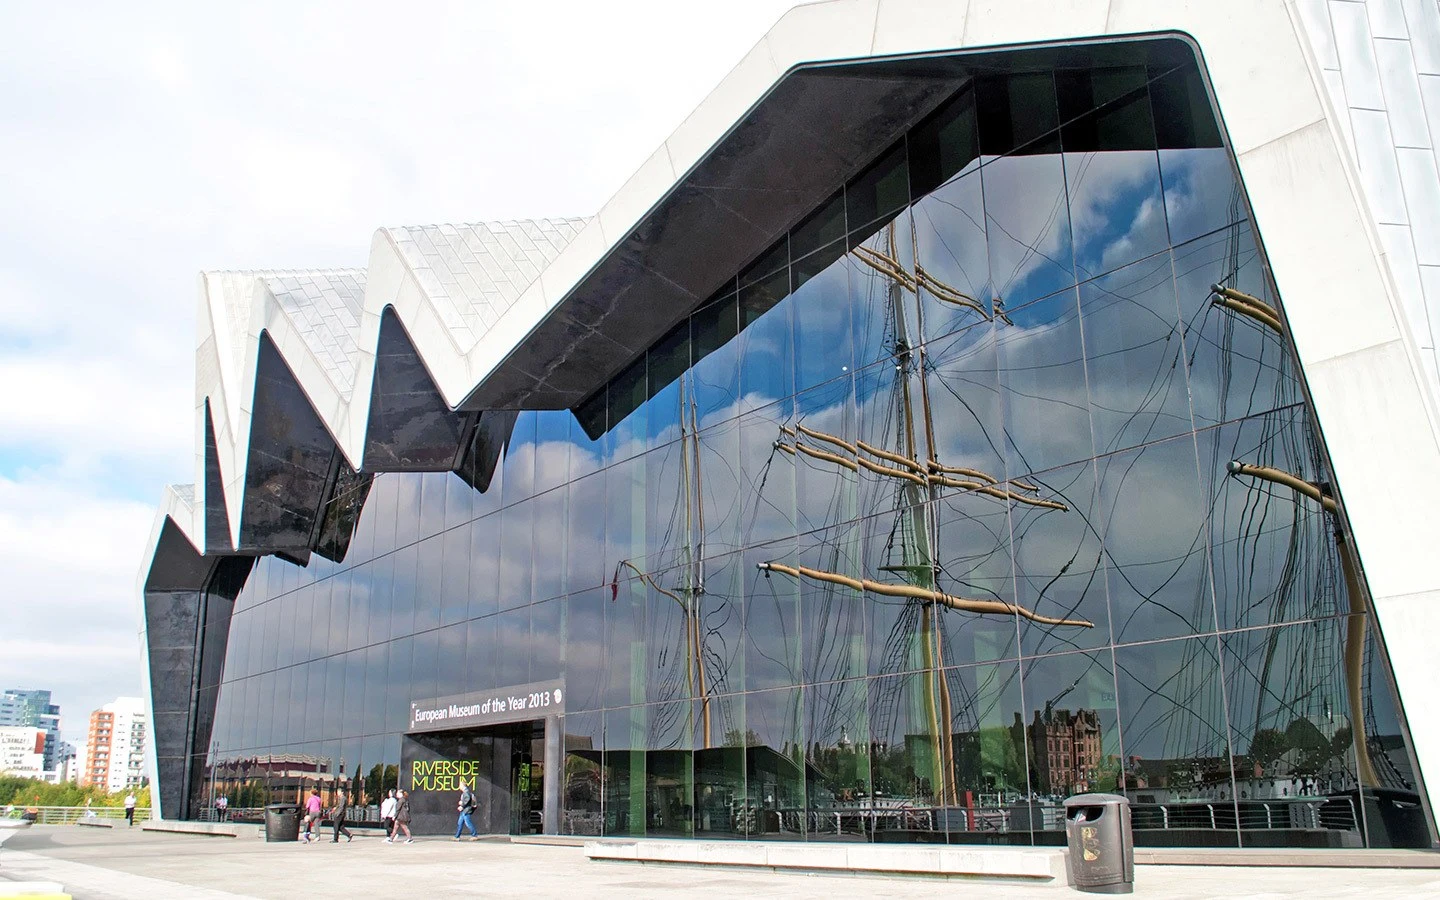 The Riverside Museum in Glasgow